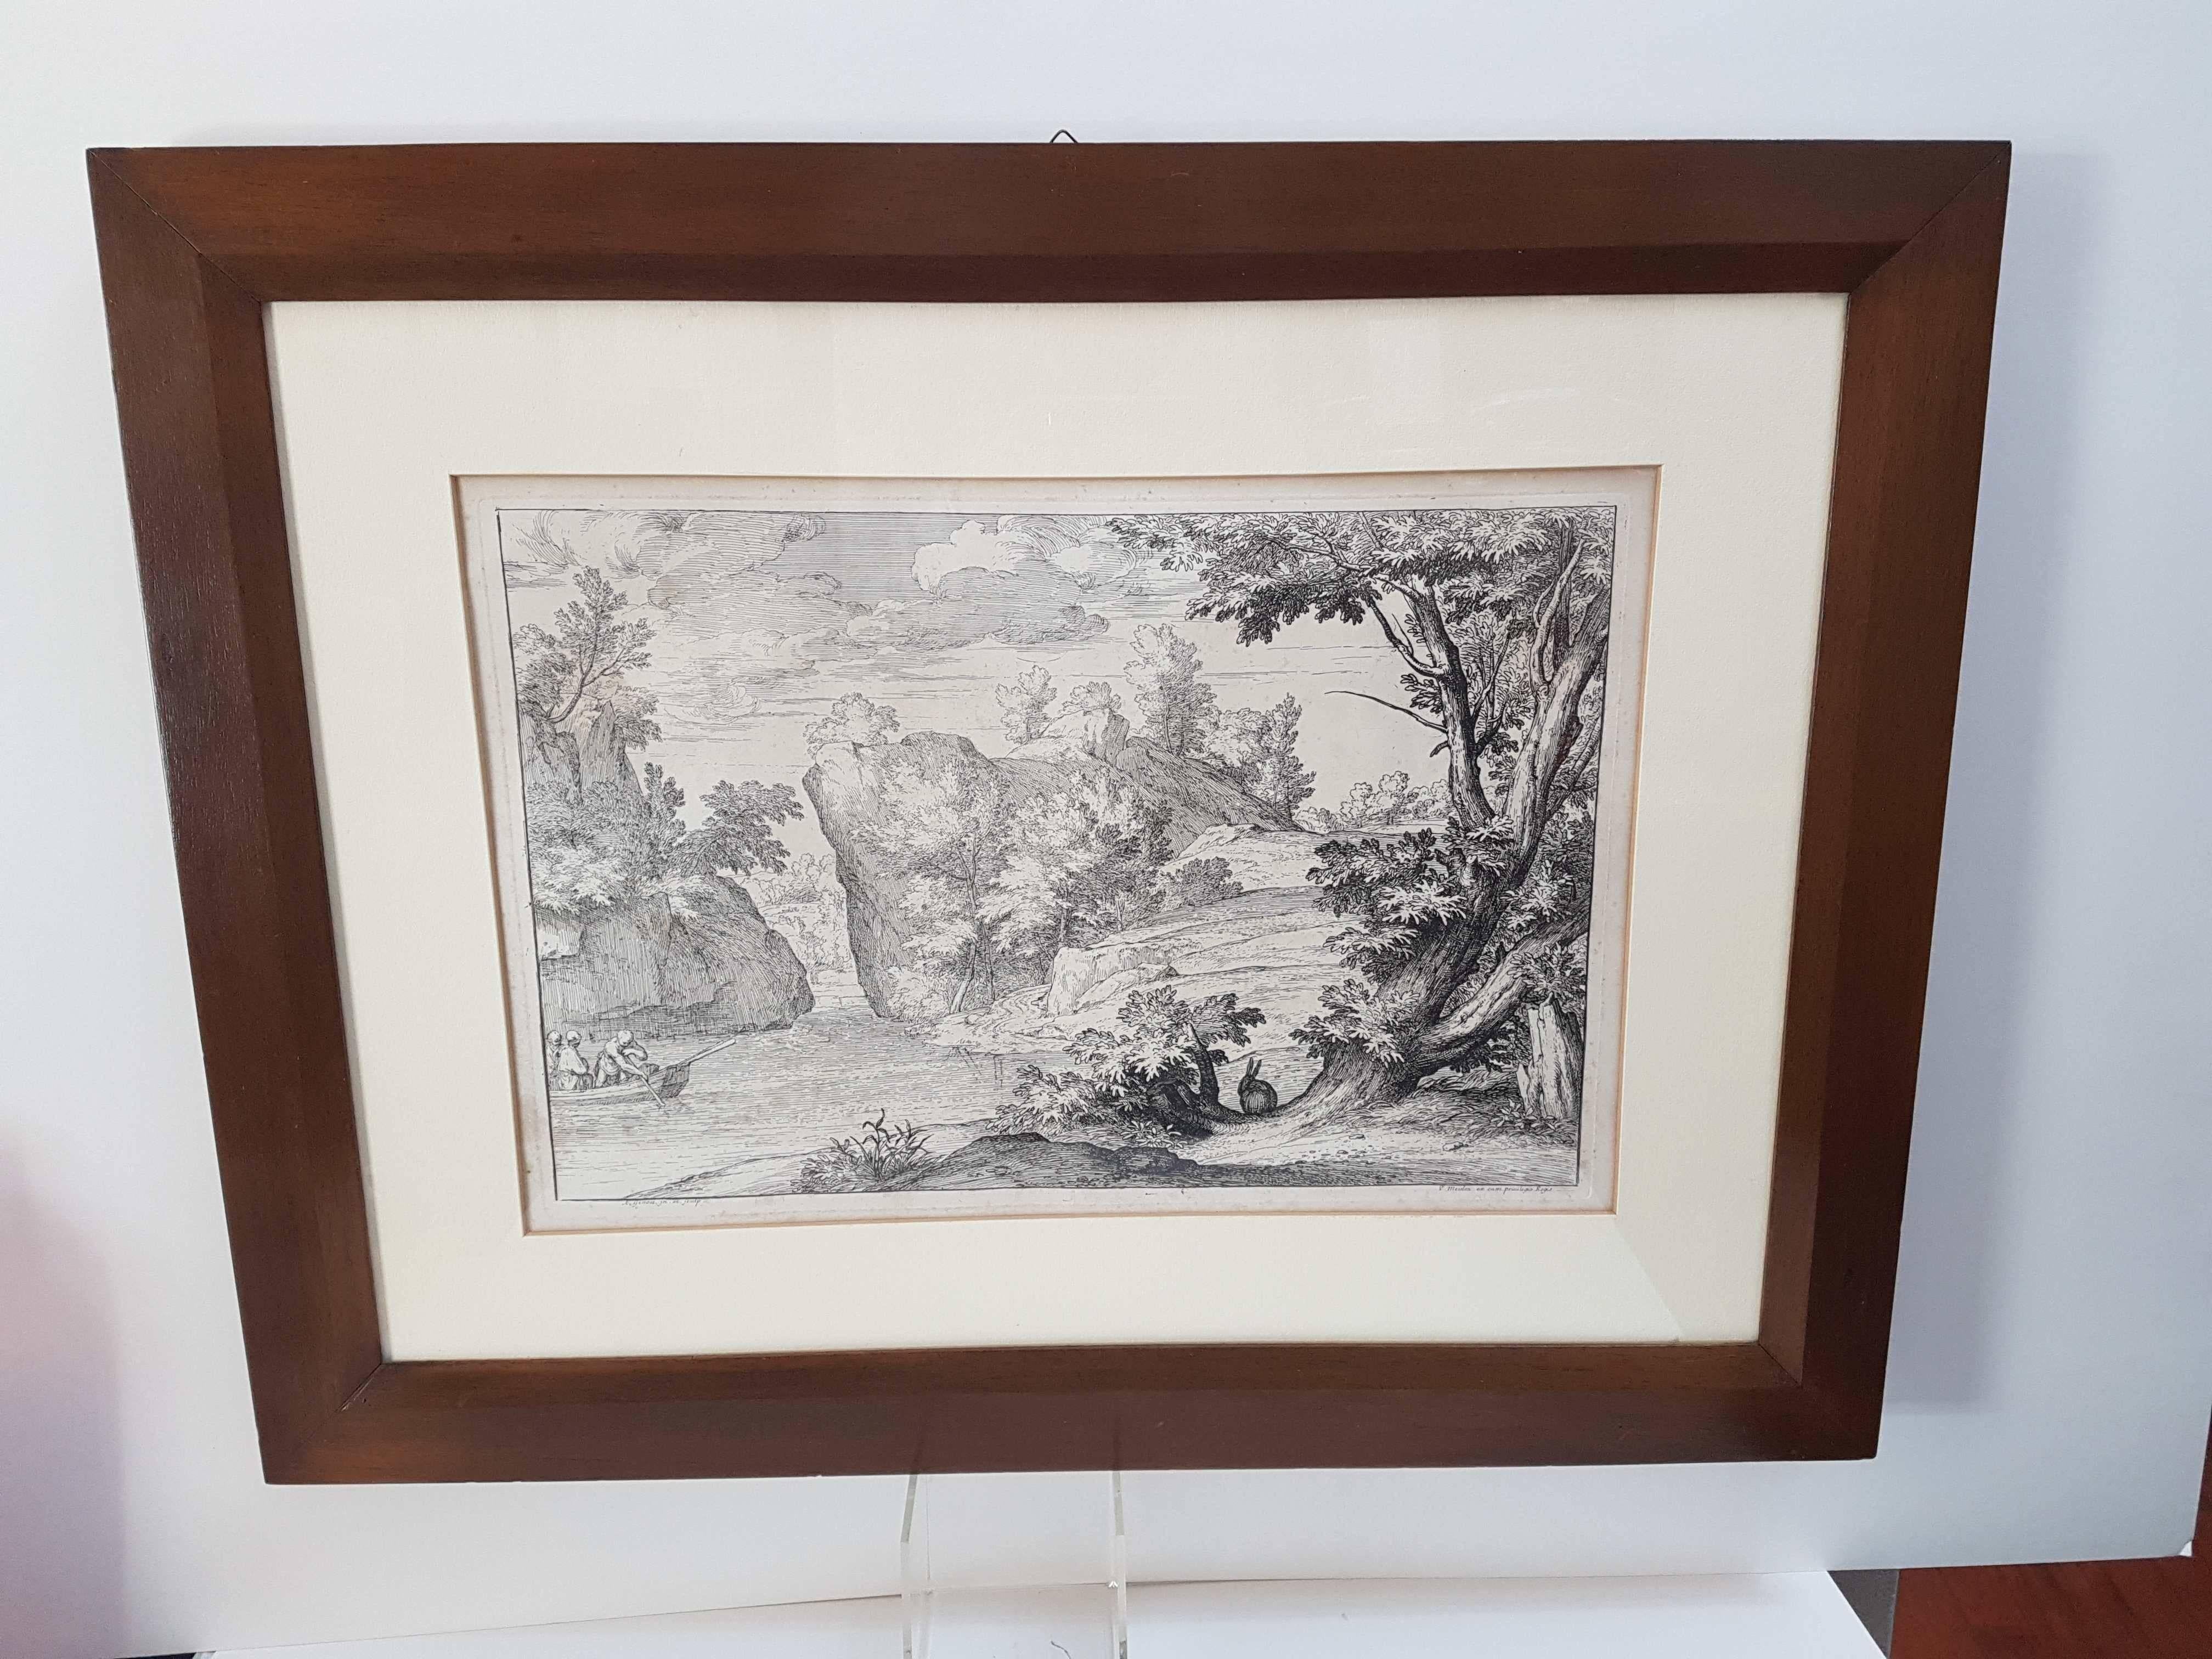 Beautiful etching by Abraham Genoels II (Antwerp 1640-1723) from a painting by Adam Frans van der Meulen (Brussels 1844-Paris 1690).
Excellent state of conservation with wide margins.
Dimension of the sheet: mm 330x490
With walnut frame: mm 600 x